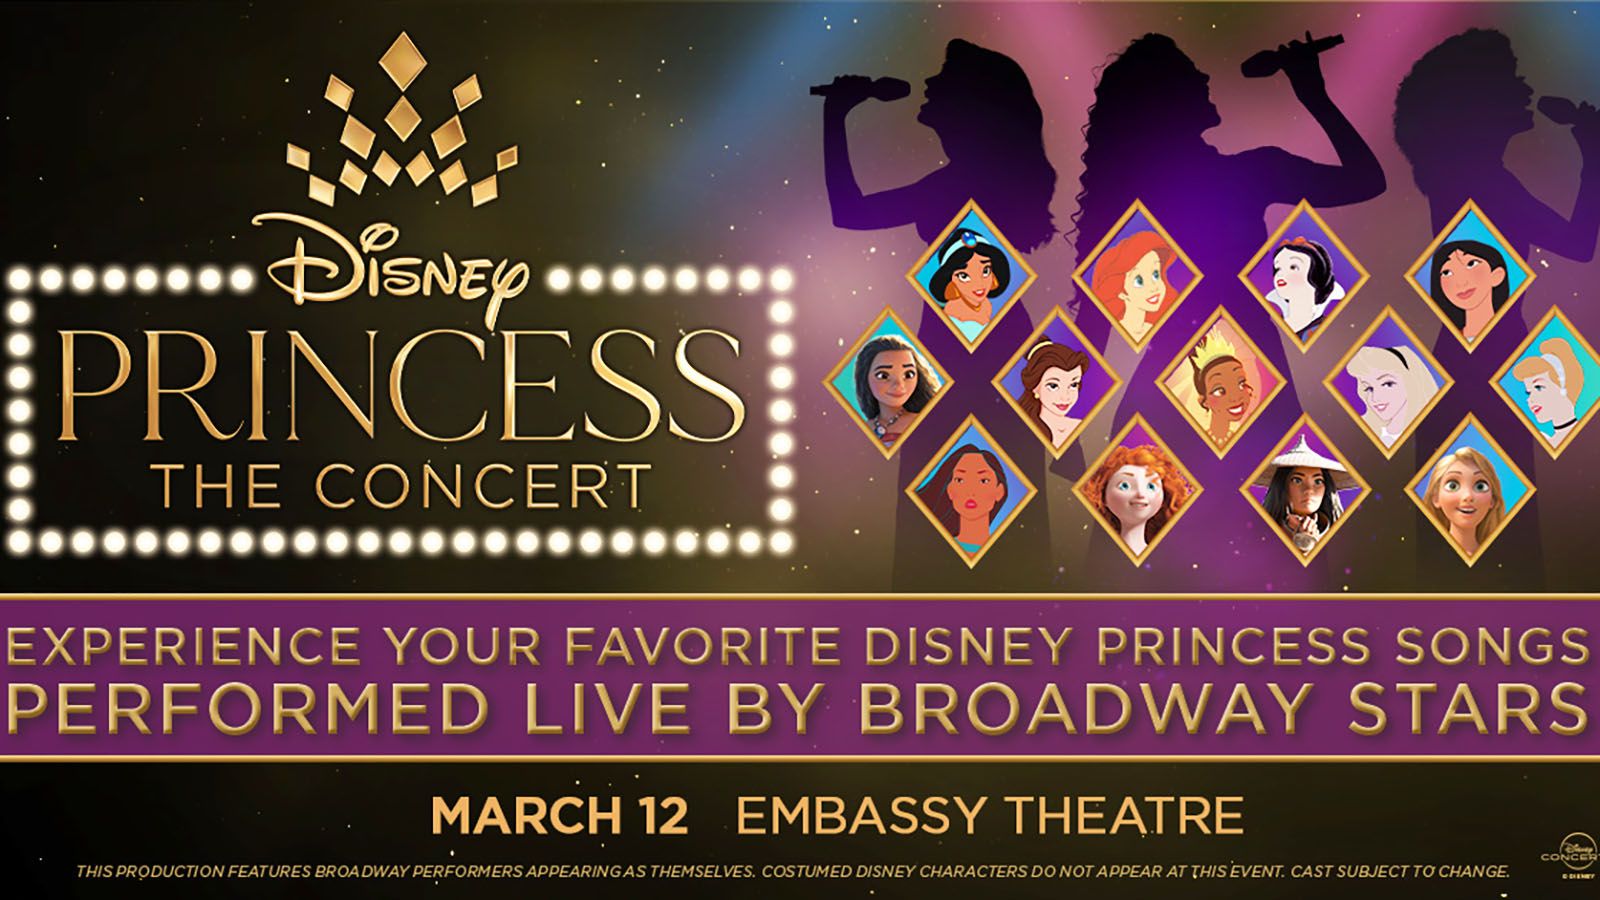 Disney Princess: In Concert stops at Embassy Theatre on Tuesday, March 12.